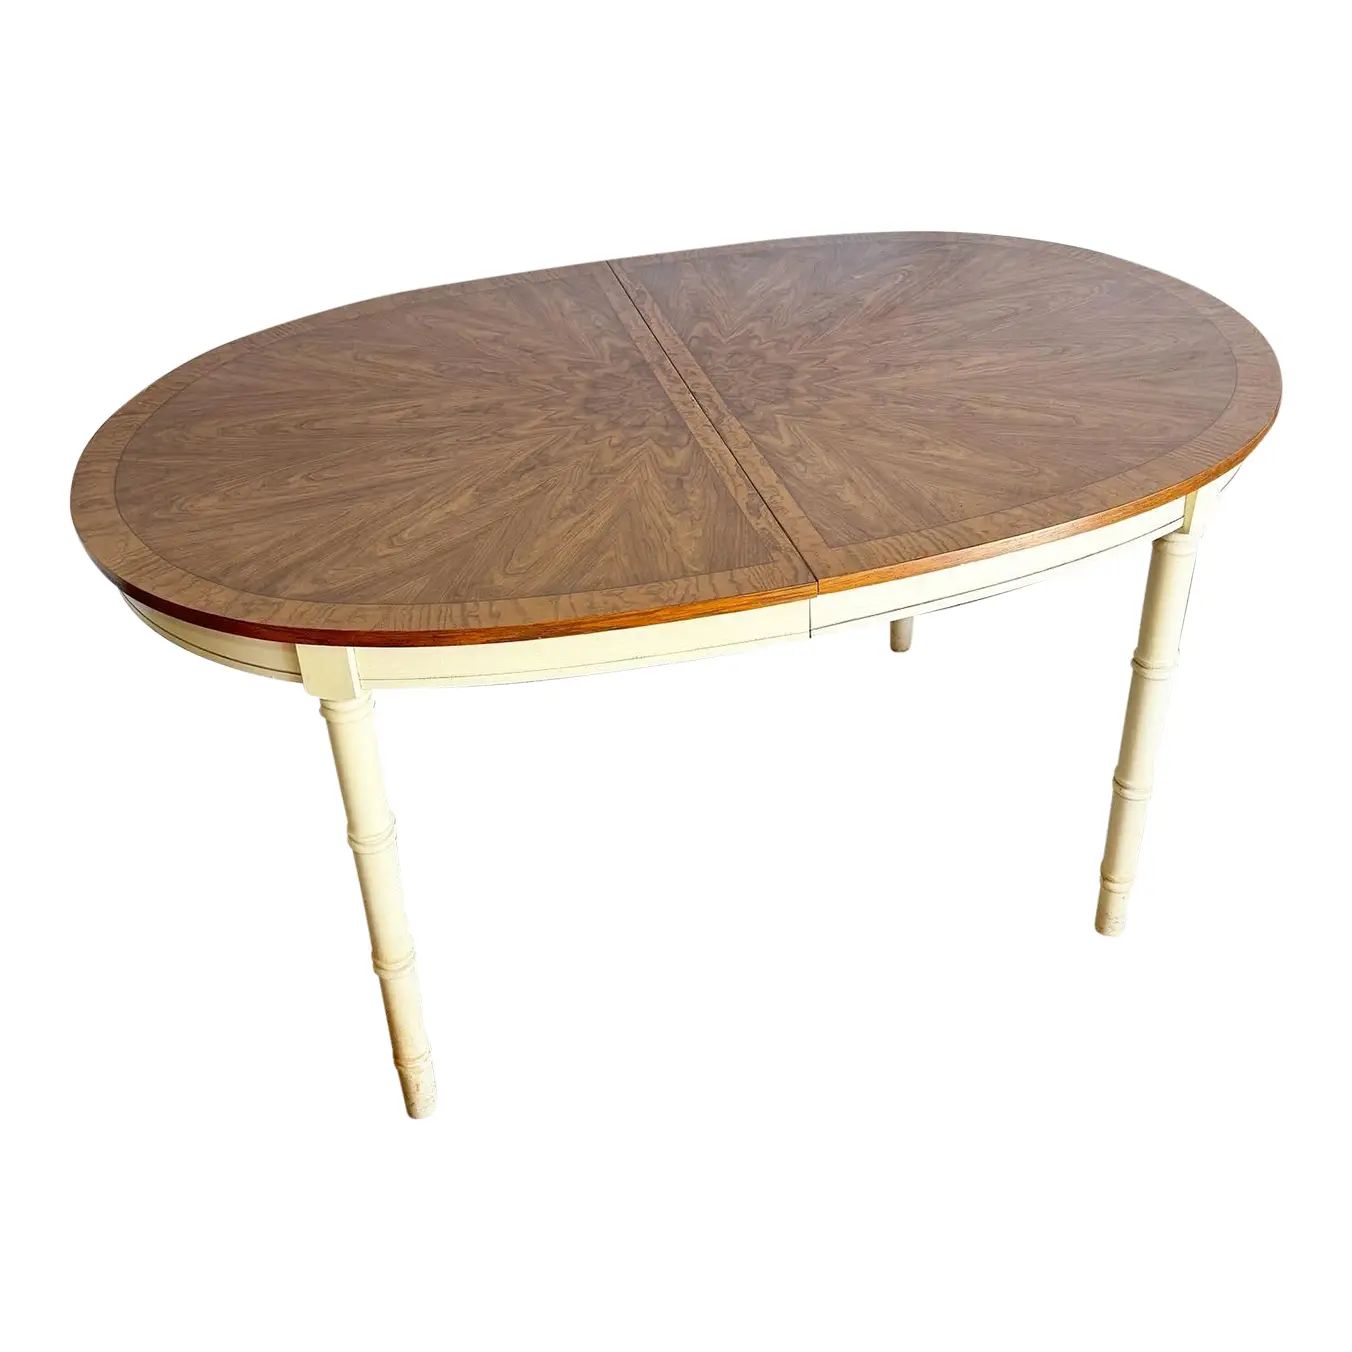 Regency Faux Bamboo Extendable Oval Dining Table | Chairish